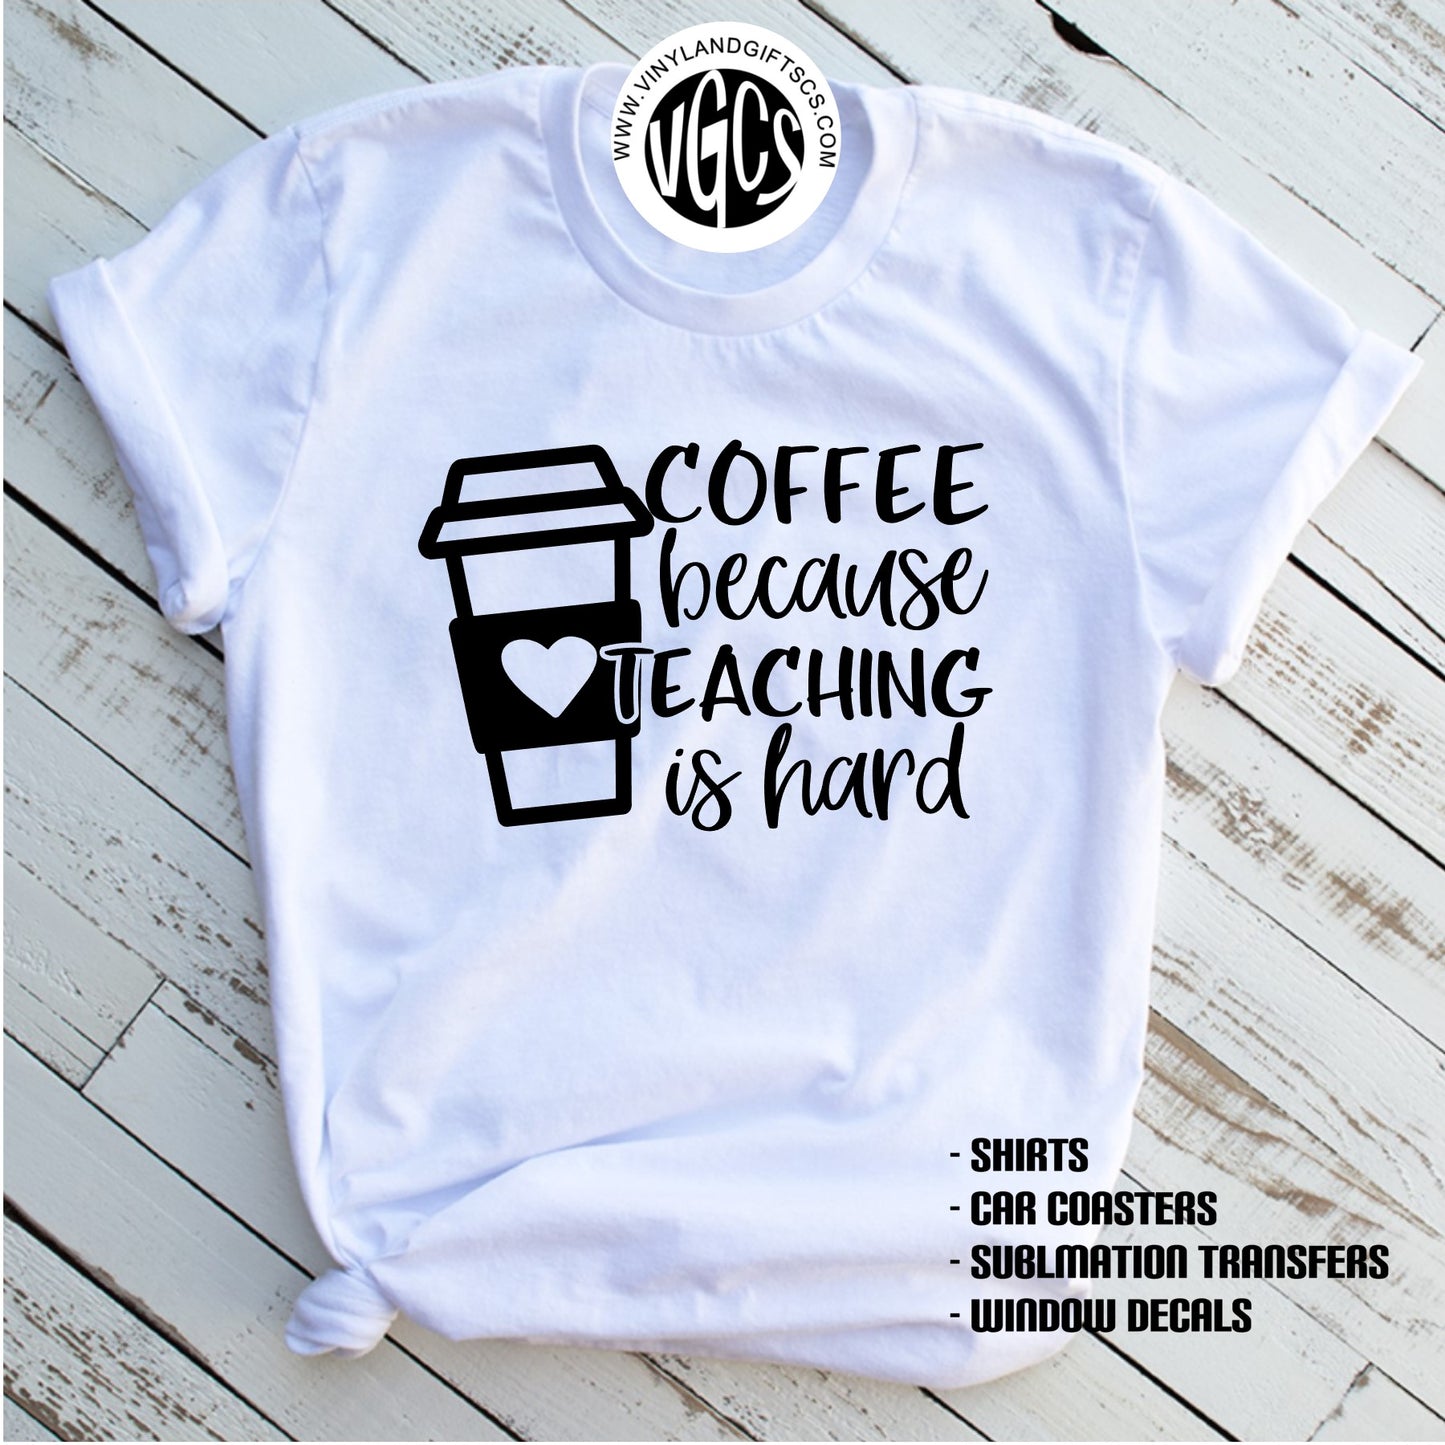 Shirts Items and Transfers  Coffee Because Teaching is Hard